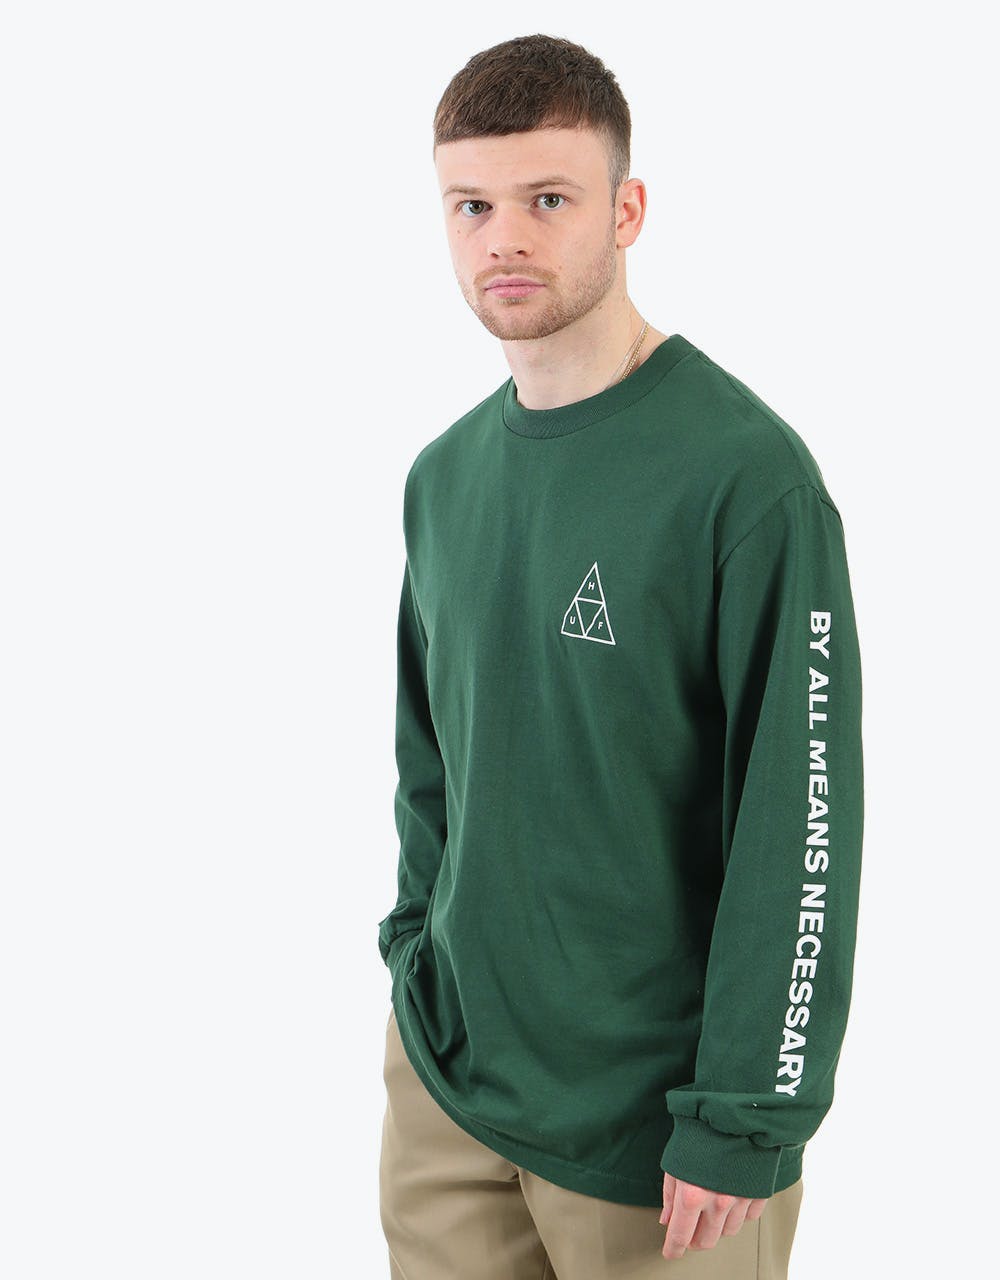 HUF Triple Triangle L/S T-Shirt - Sycamore